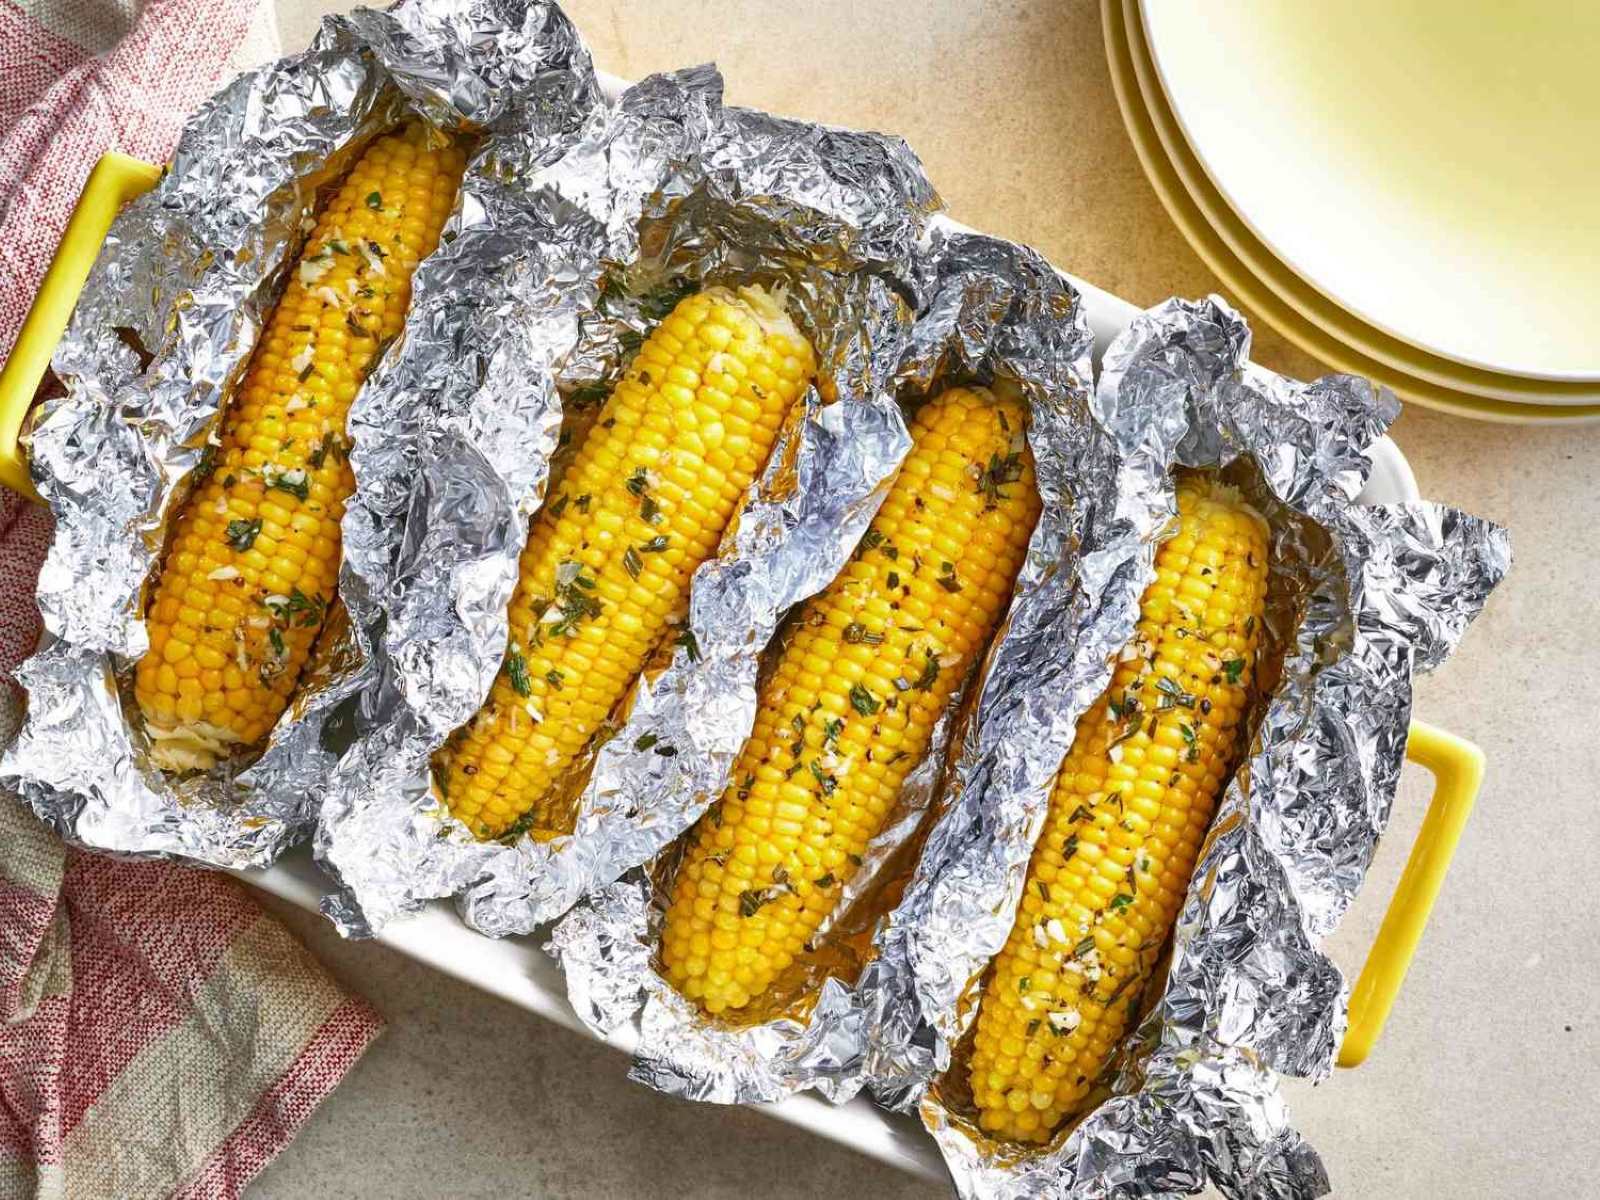 How To Reheat Corn On The Cob In The Microwave